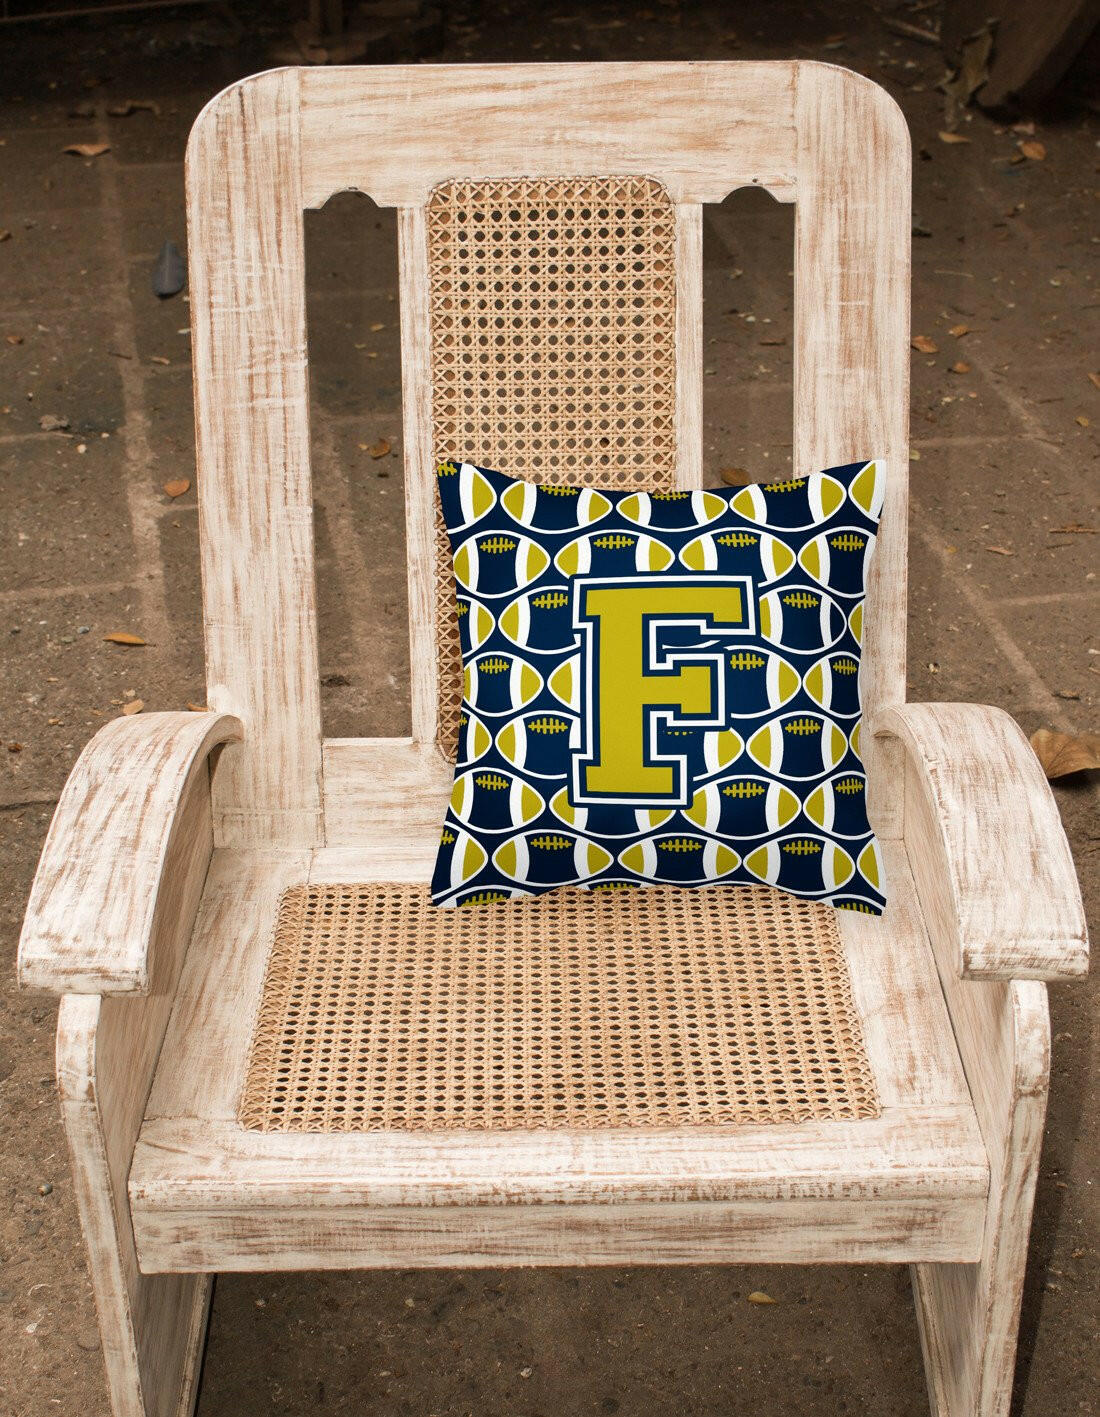 Letter F Football Blue and Gold Fabric Decorative Pillow CJ1074-FPW1414 by Caroline's Treasures